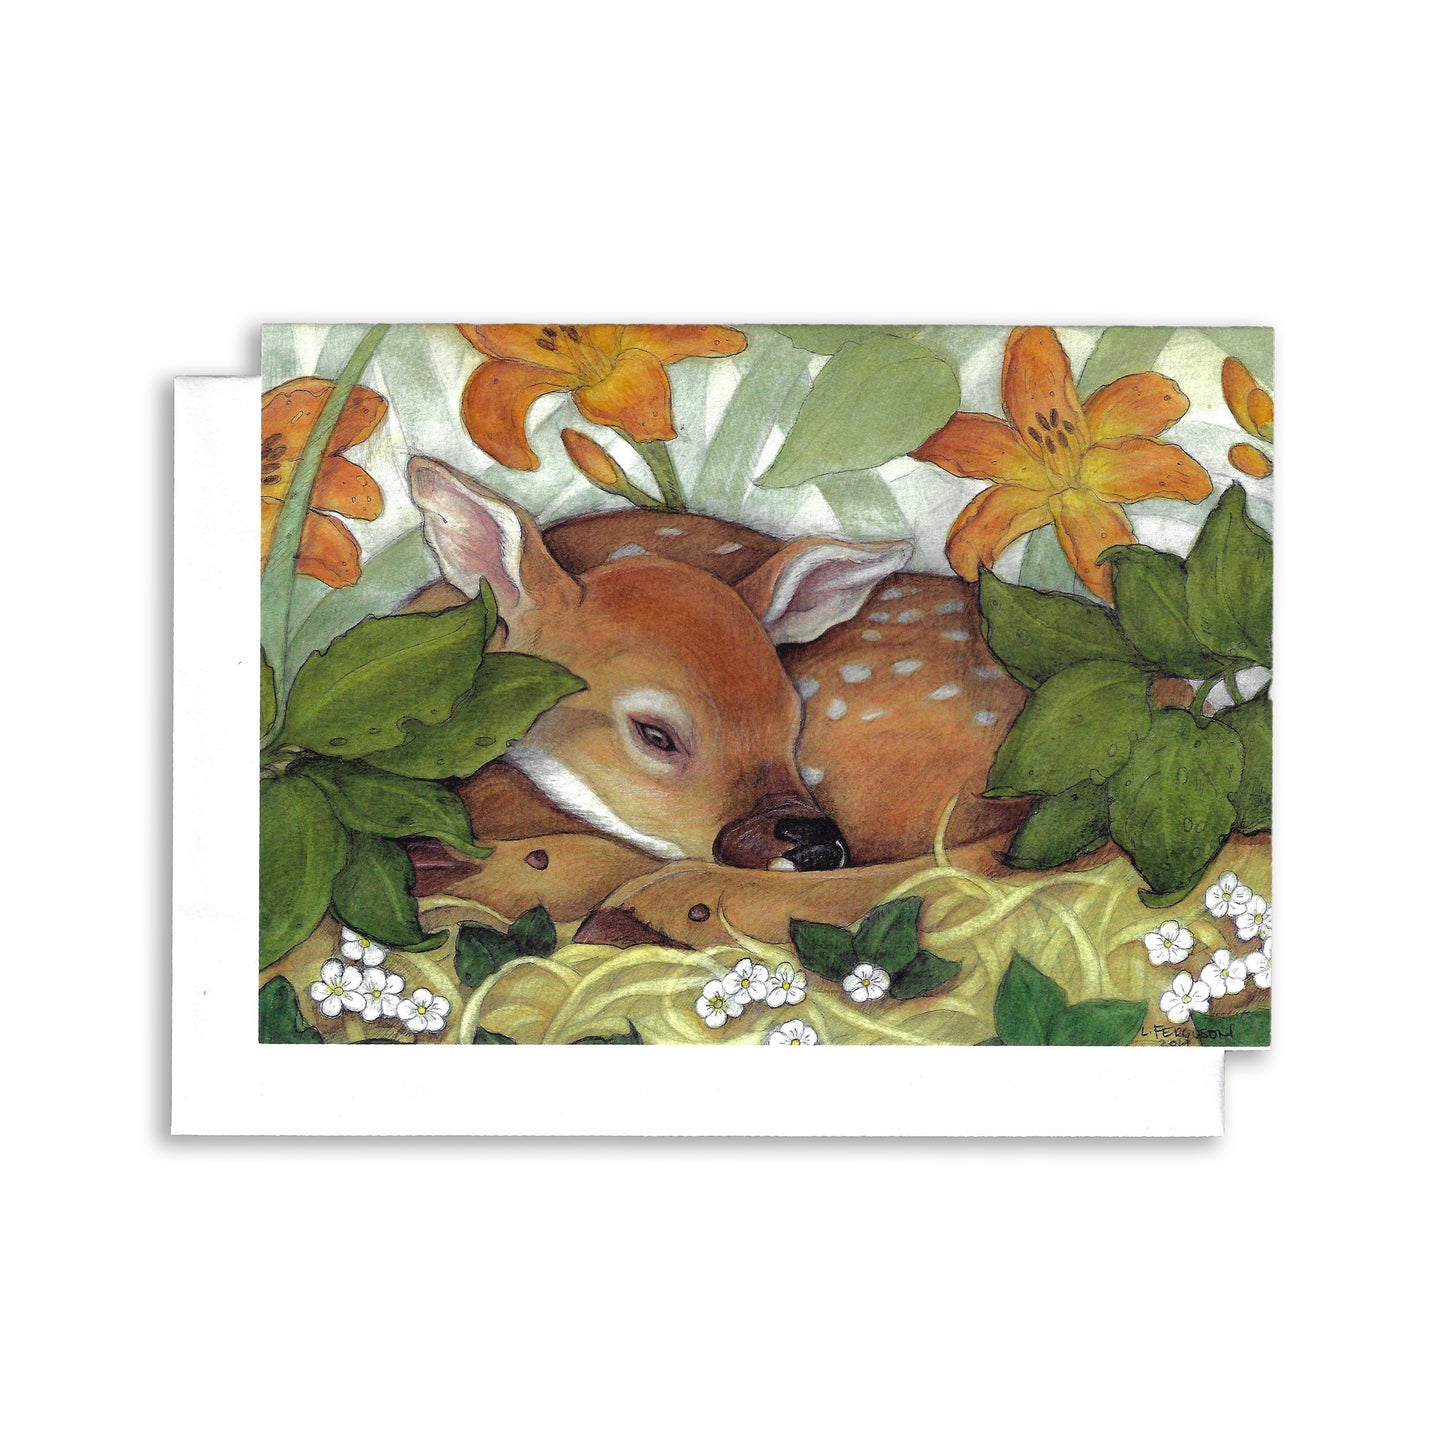 An illustrated greeting card of a fawn sleeping among the tiger lilies and small white flowers.